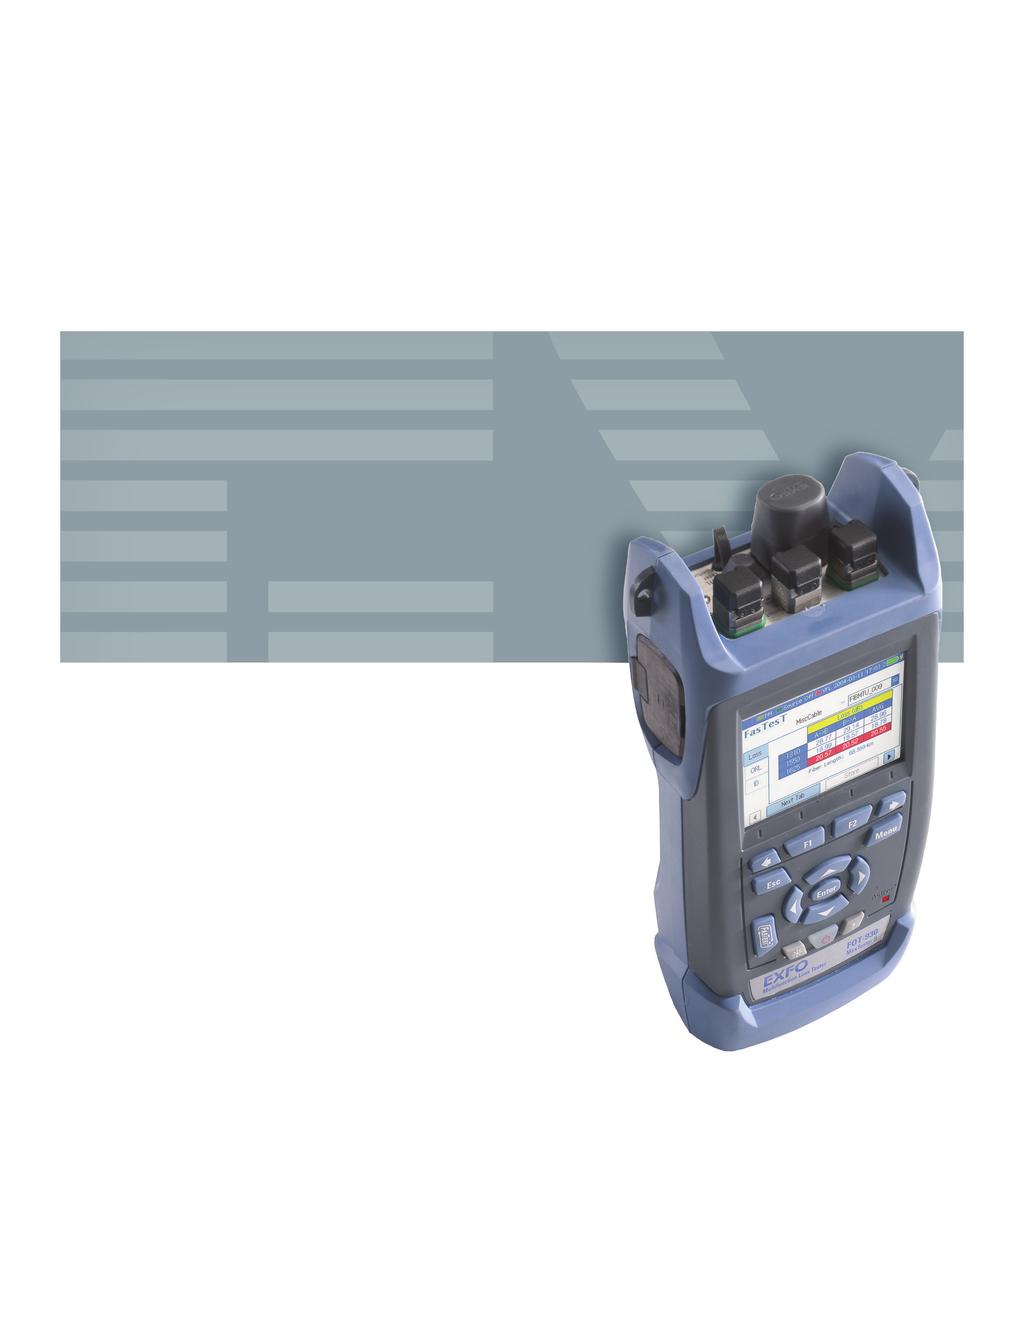 930 NETWORK TESTING MULTIFUNCTION LOSS TESTER FasTesT TM : three-wavelength measurement of optical loss, ORL and fiber length in 10 seconds All-in-one portable test solution: up to eight instruments